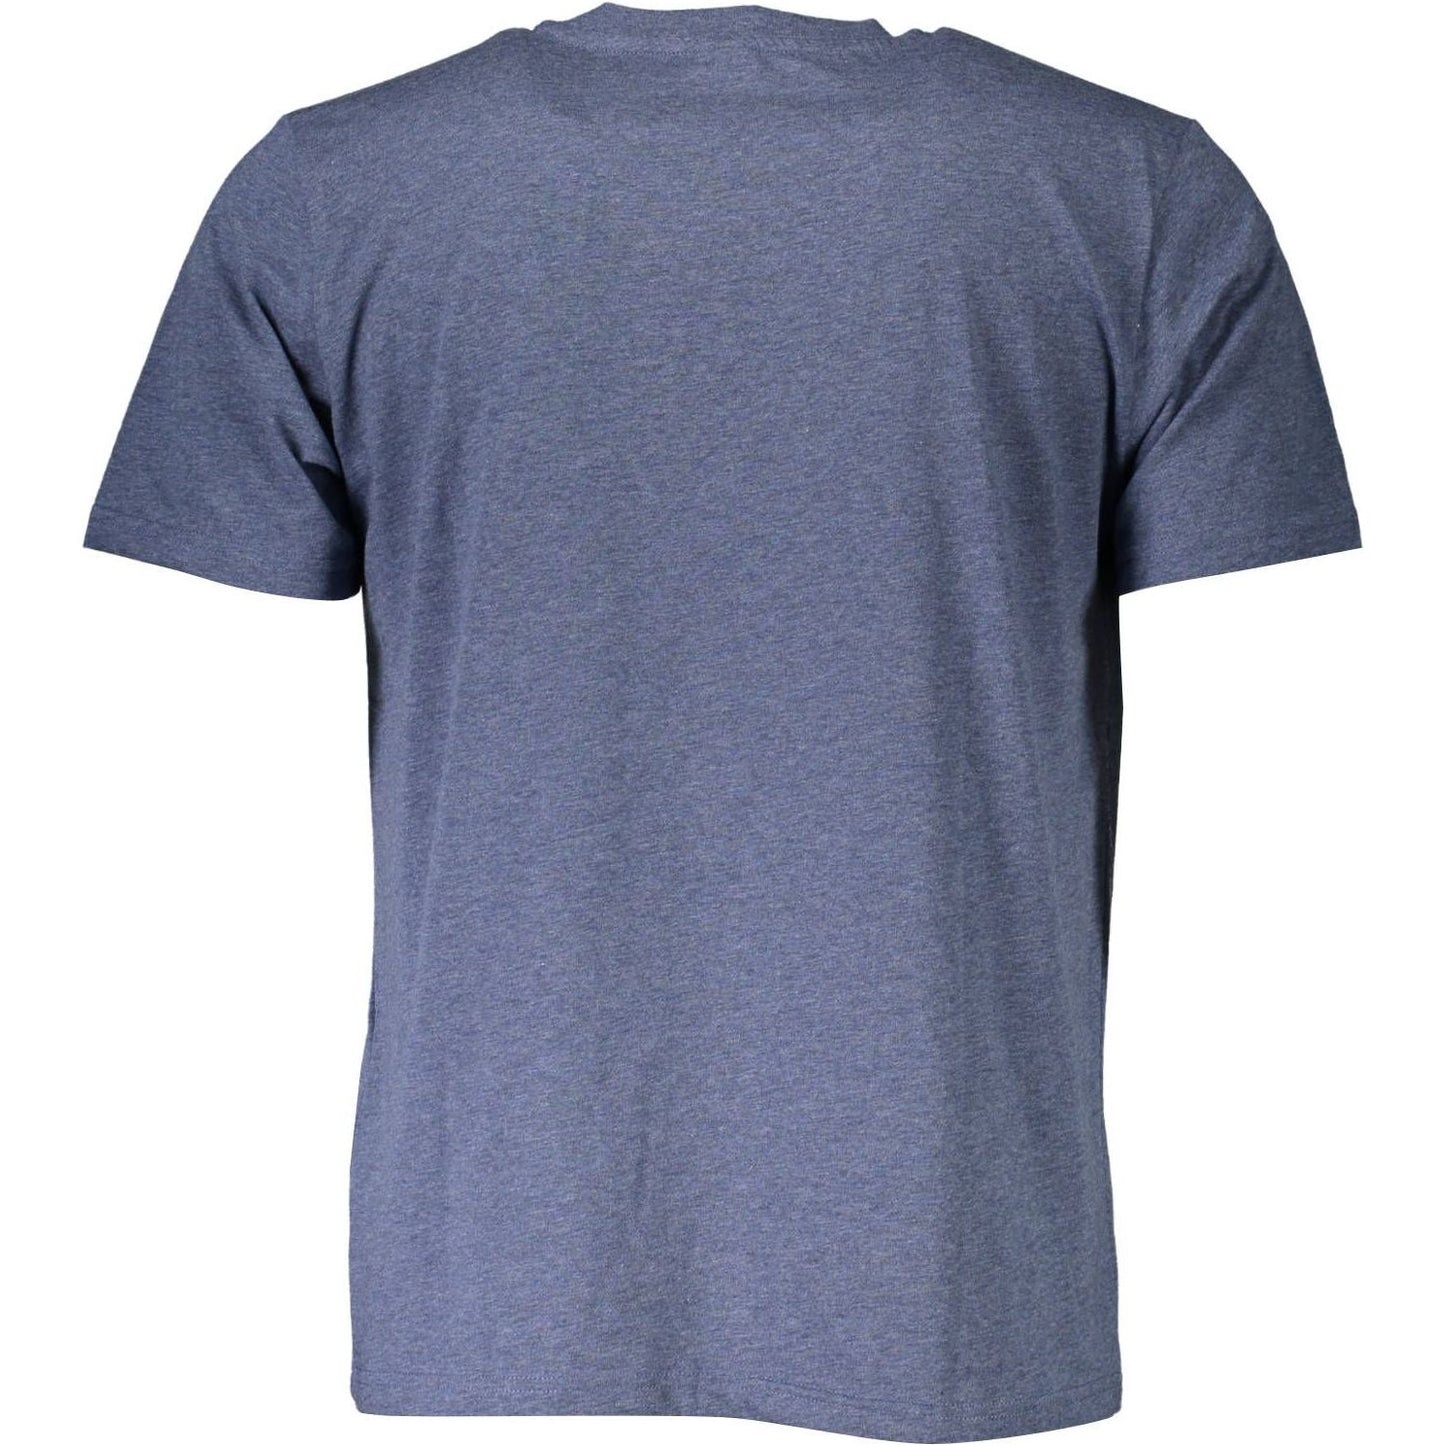 North Sails Classic Blue Cotton Tee with Logo Detail classic-blue-cotton-tee-with-logo-detail